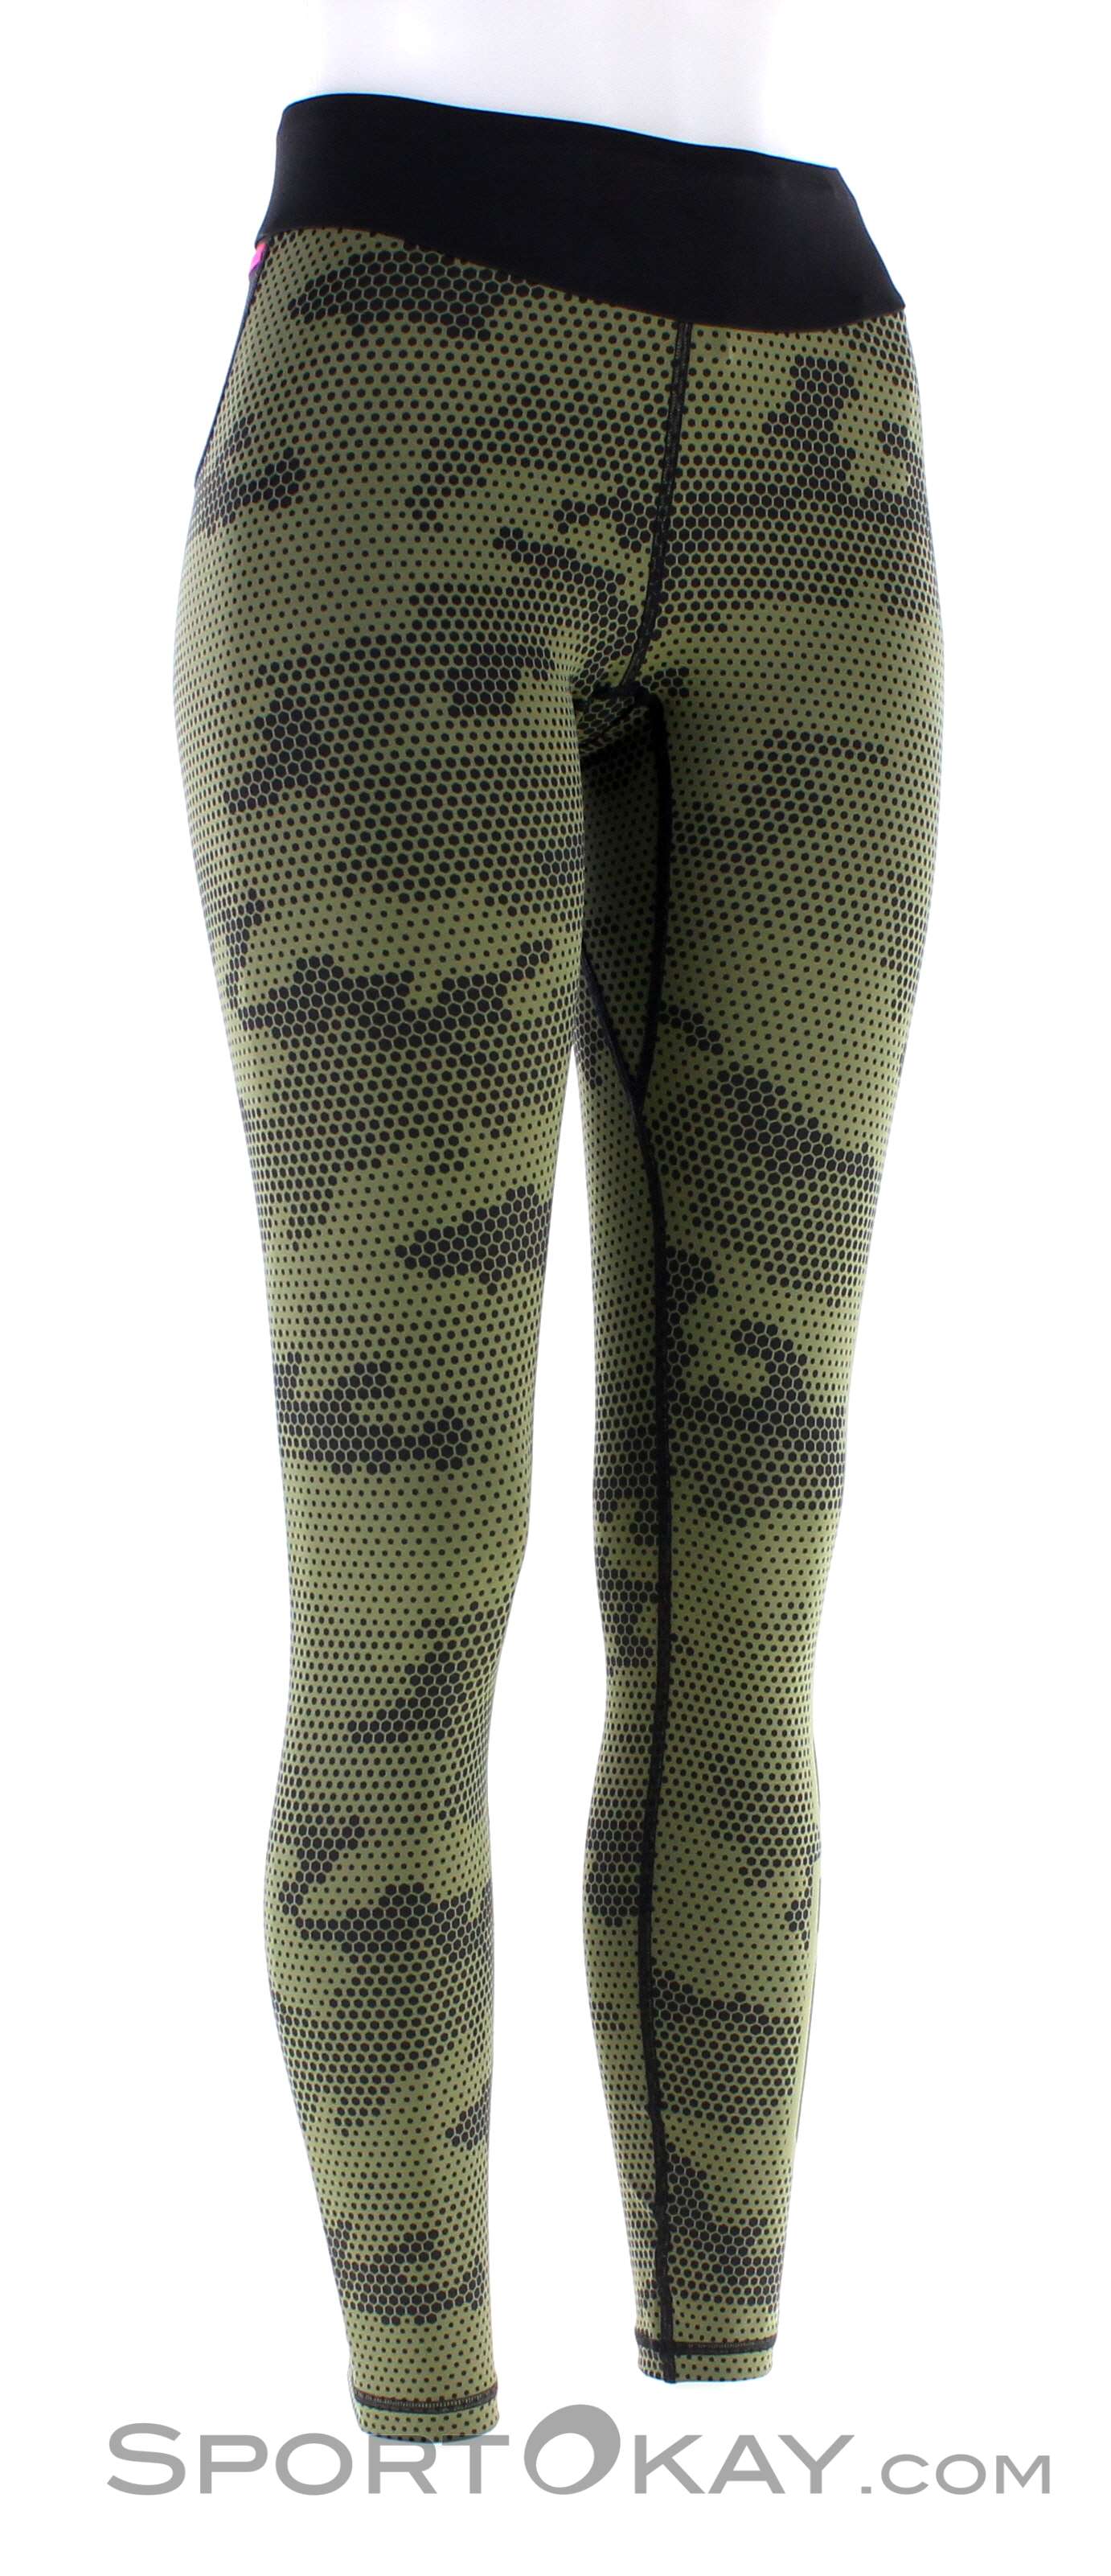 Dynafit Trail Graphic Tights Women Running Pants - Pants - Fitness